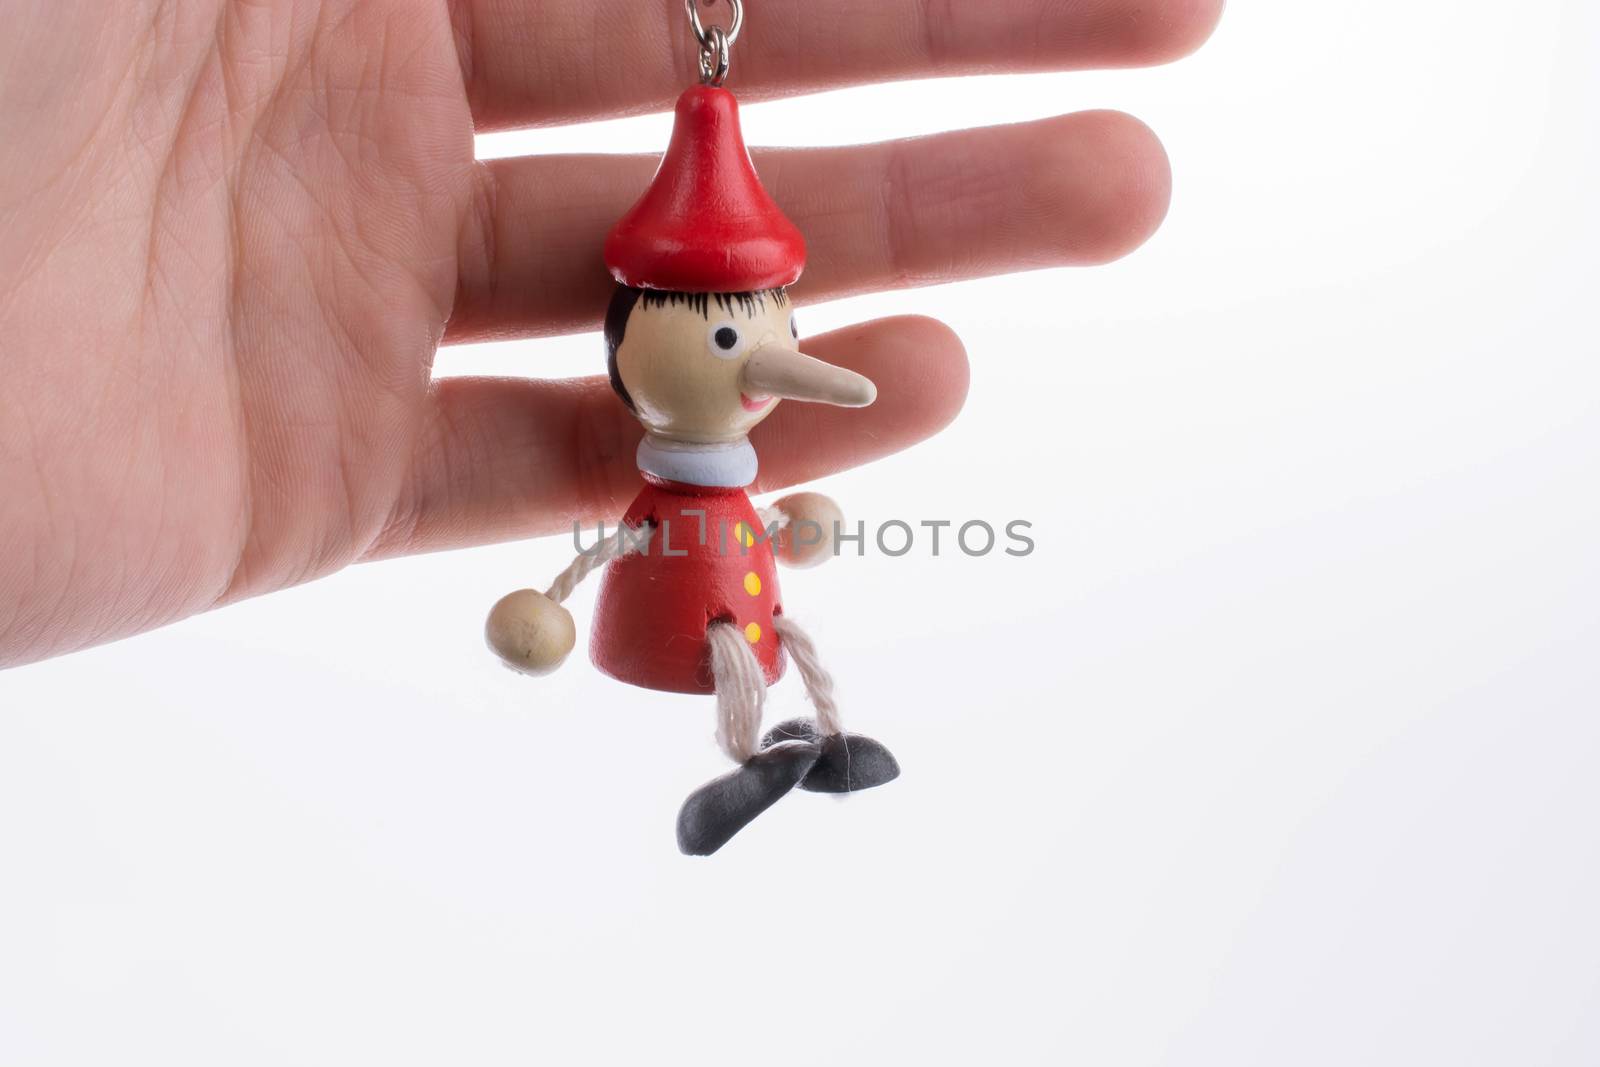 Wooden pinocchio doll with his long nose by berkay